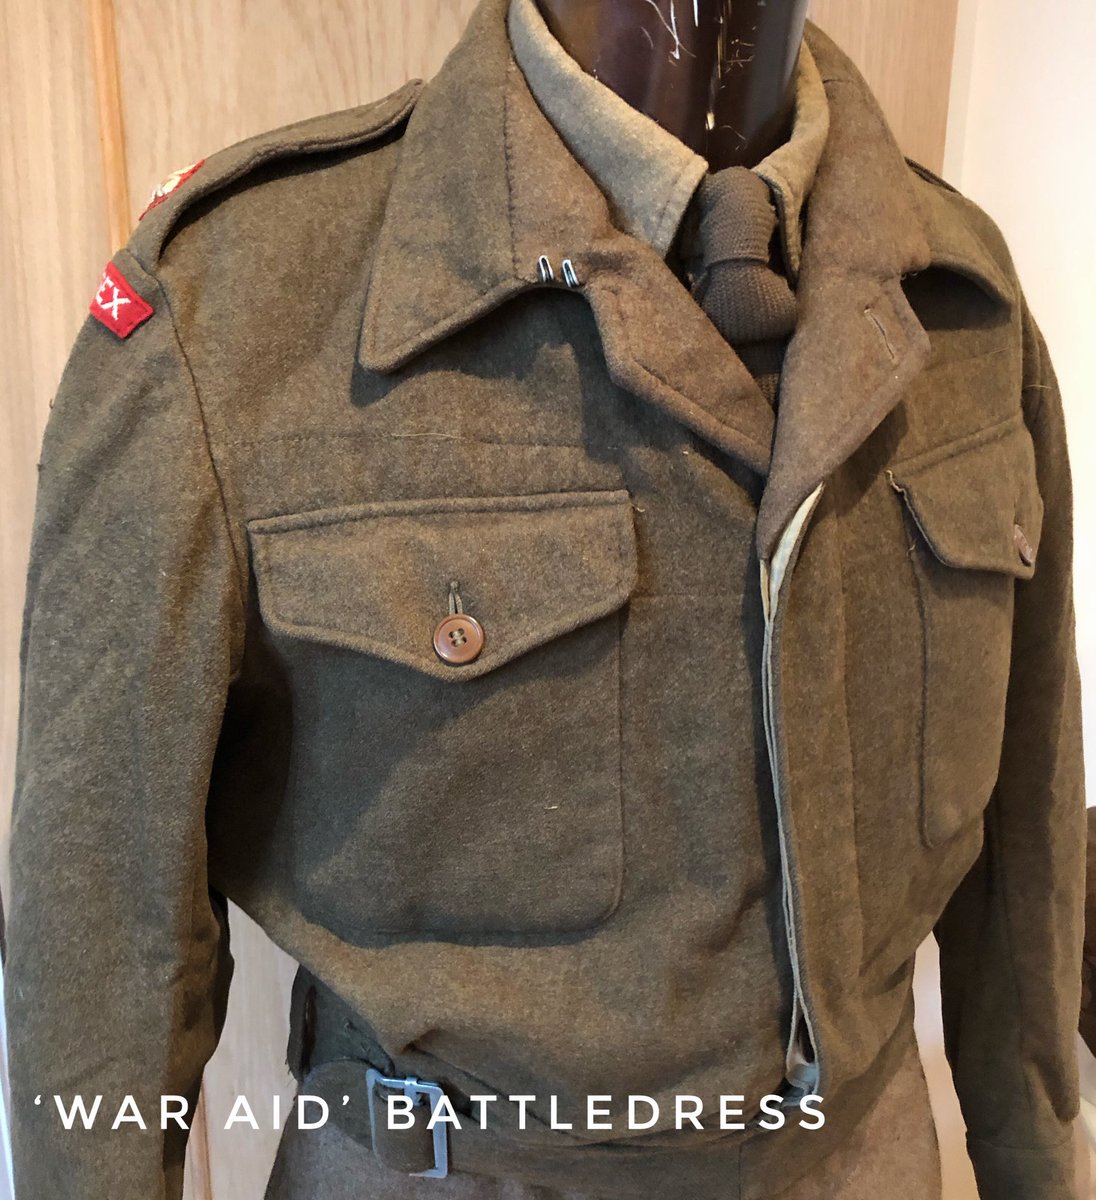 ‘War Aid’ battledress is typically seen worn by British troops in the Italian campaign. It was noticeably greener (compare the collar facing), concealed buttons and had distinct buttoned pockets. It was also SO much softer than standard  #BattledressThread